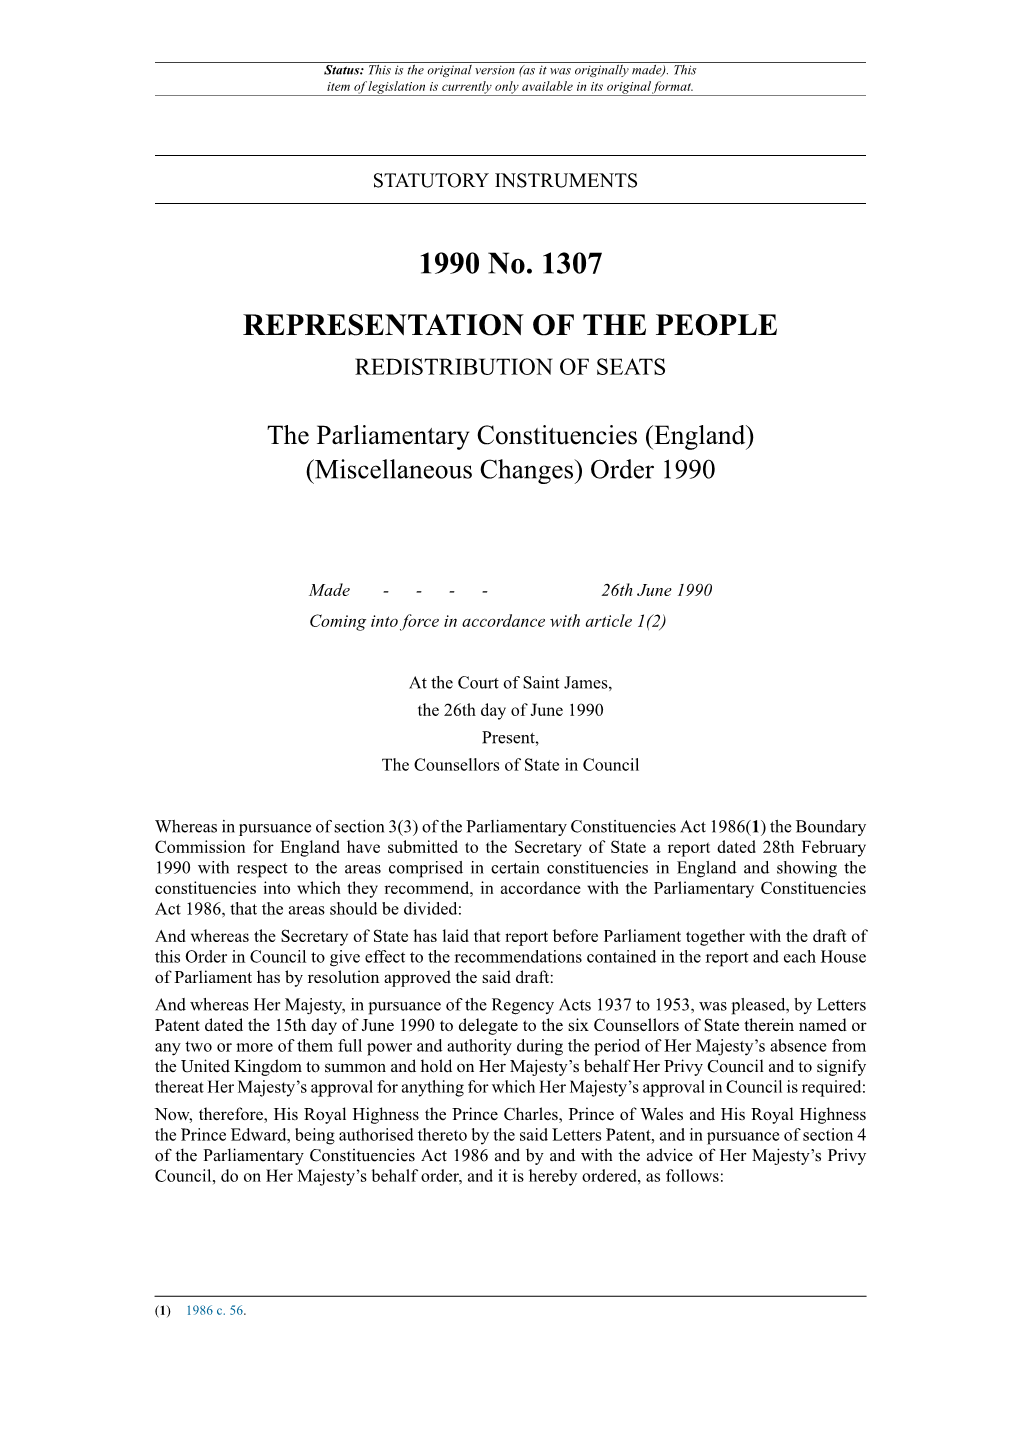 The Parliamentary Constituencies (England) (Miscellaneous Changes) Order 1990